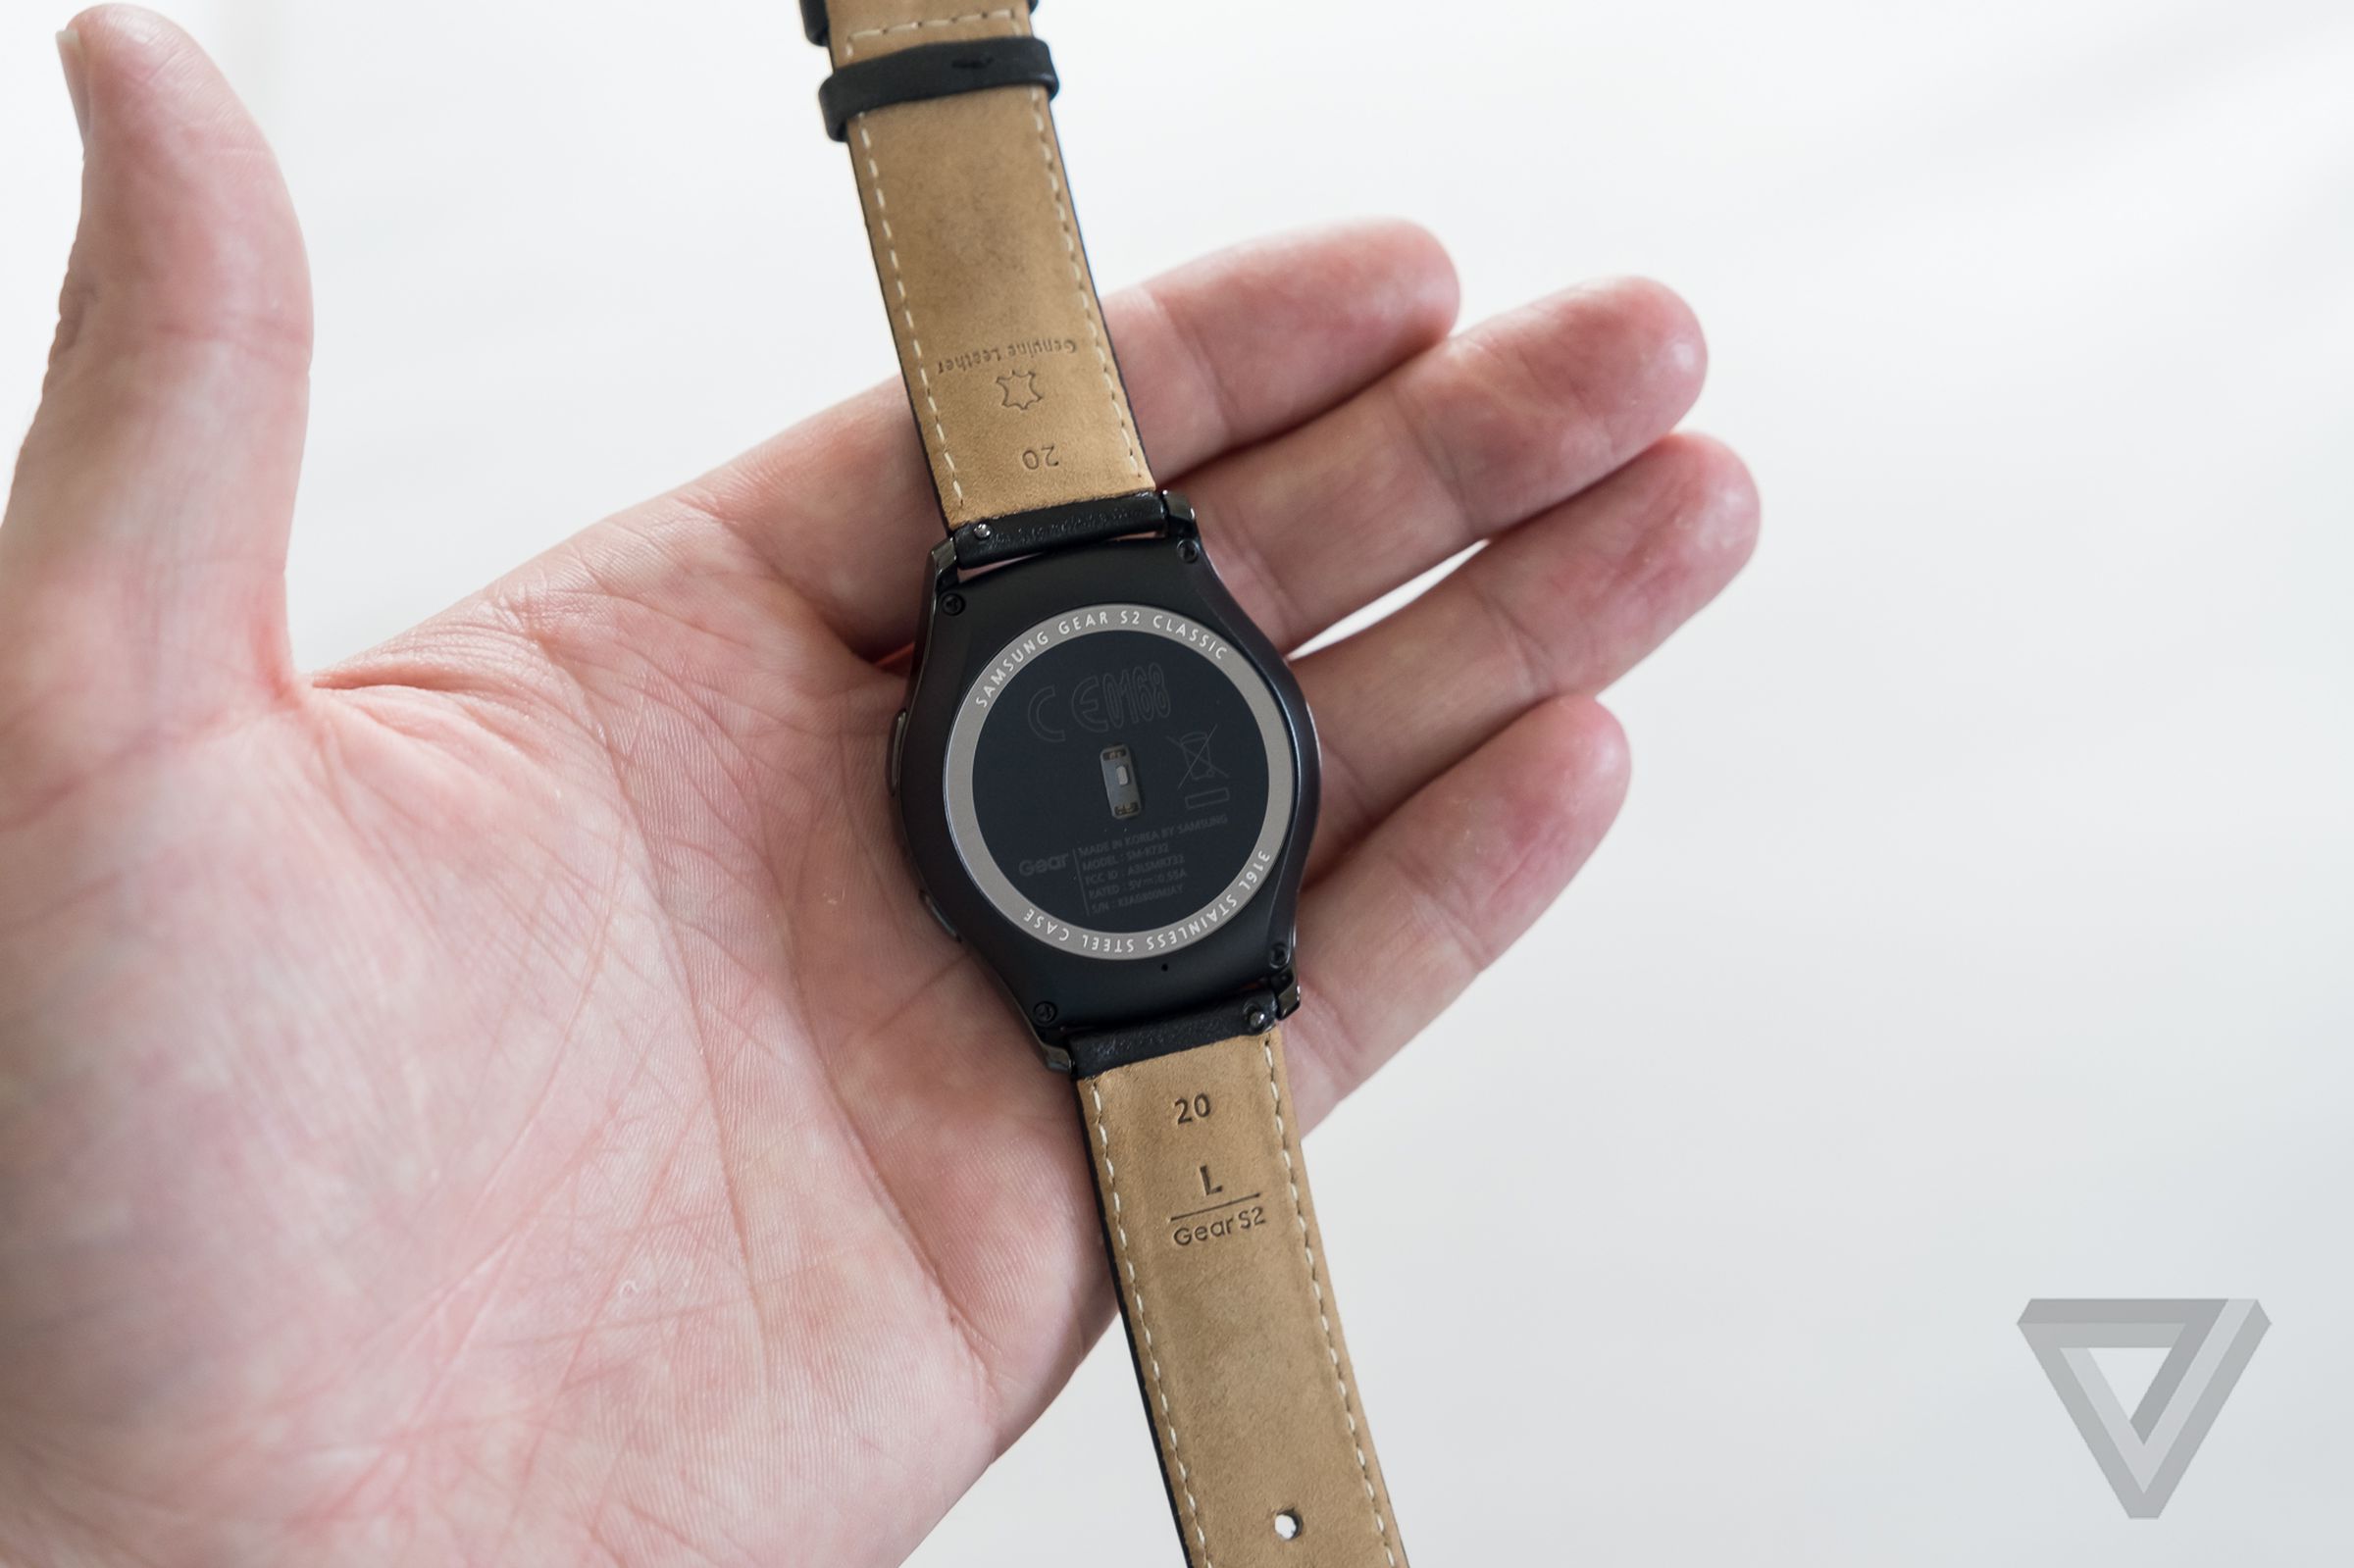 Samsung Gear S2 hands-on images